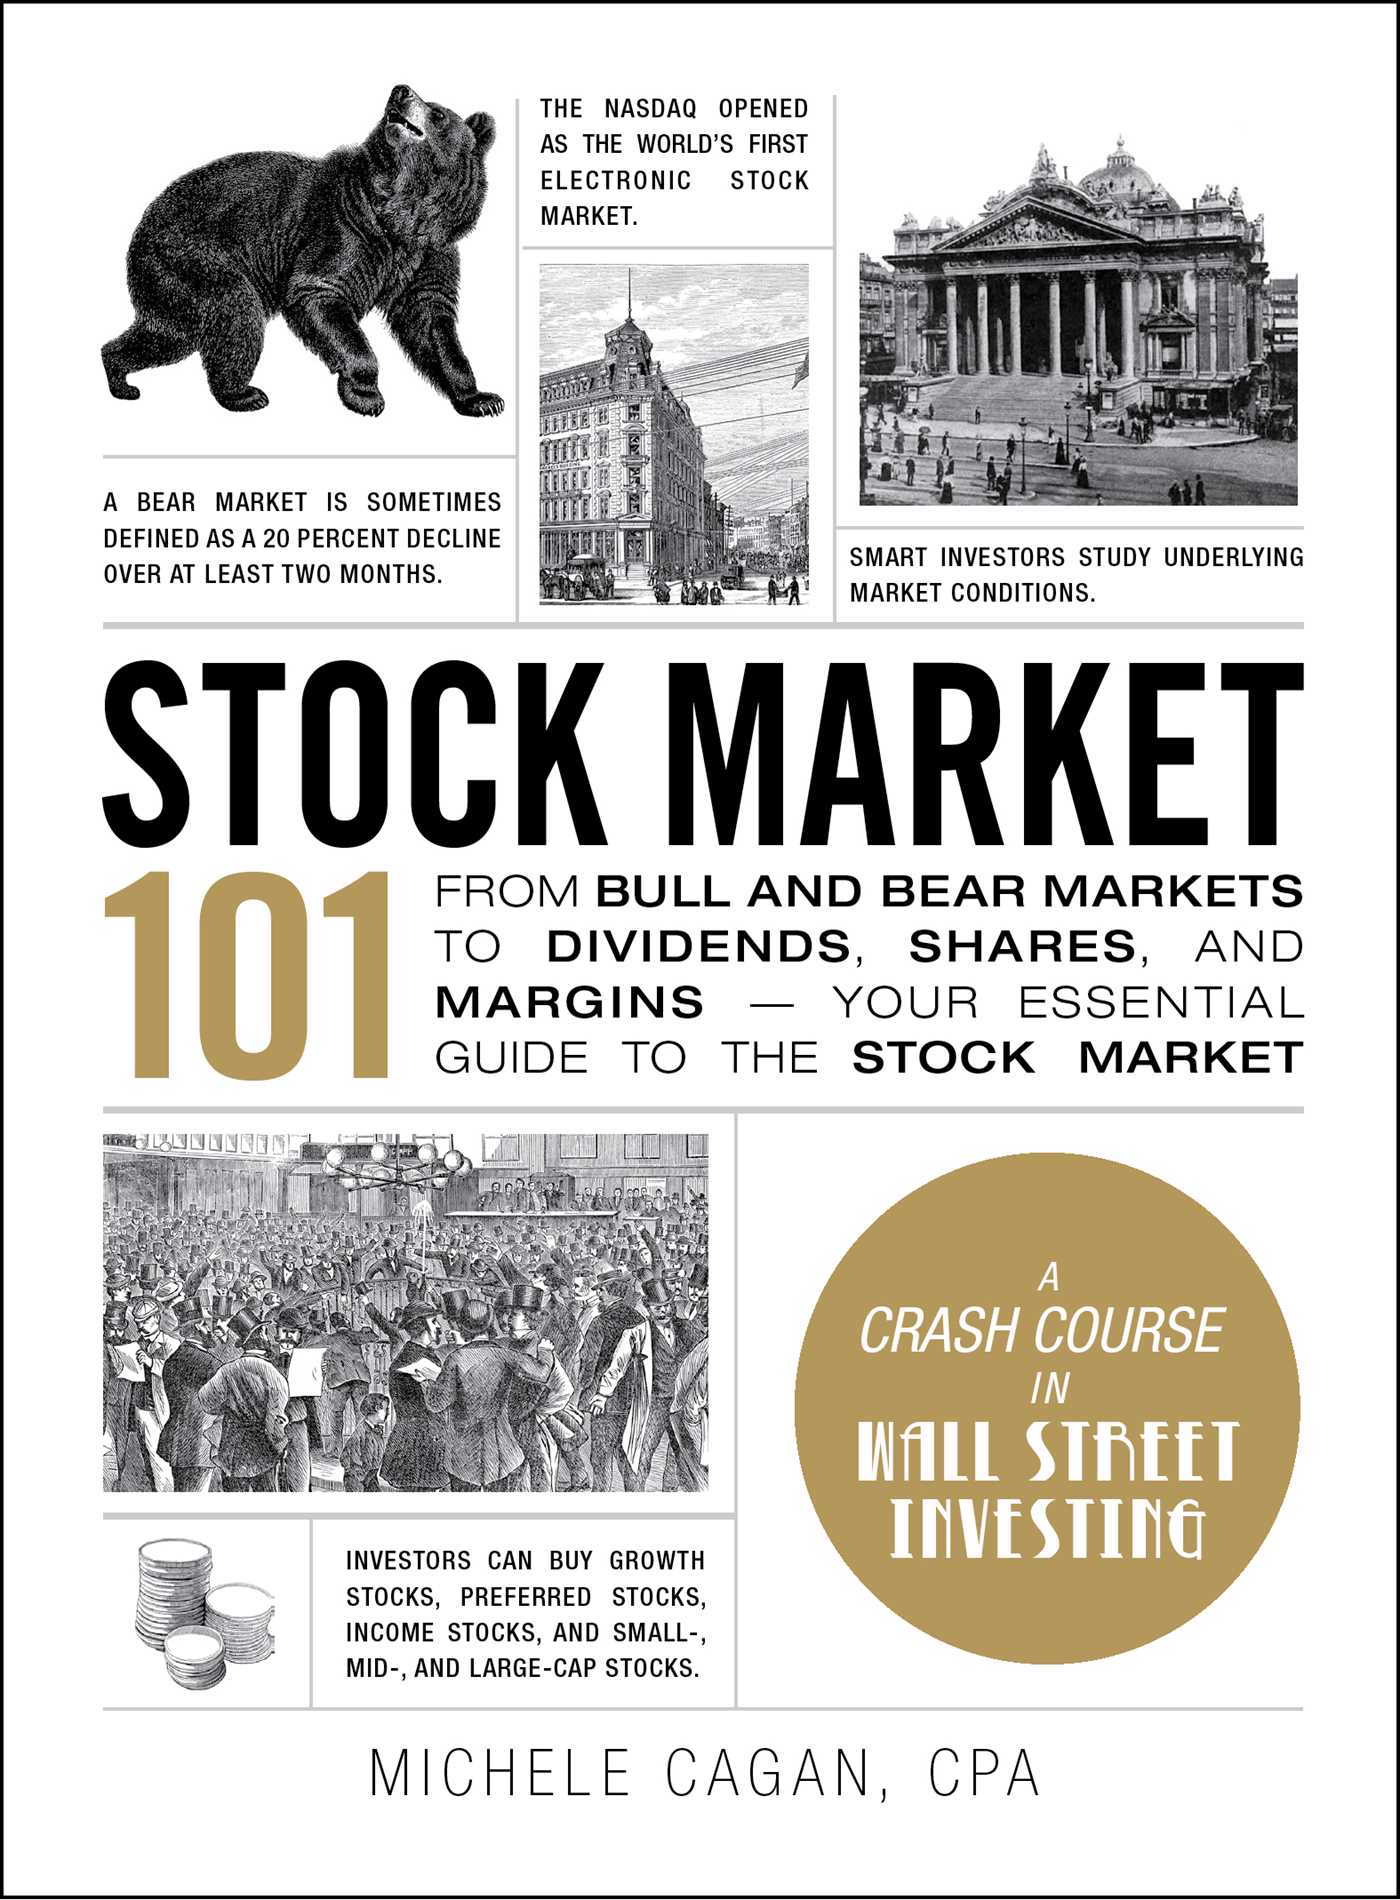 Stock Market 101 From Bull and Bear Markets to Dividends, Shares, and Margins—Your Essential Guide to the Stock Market